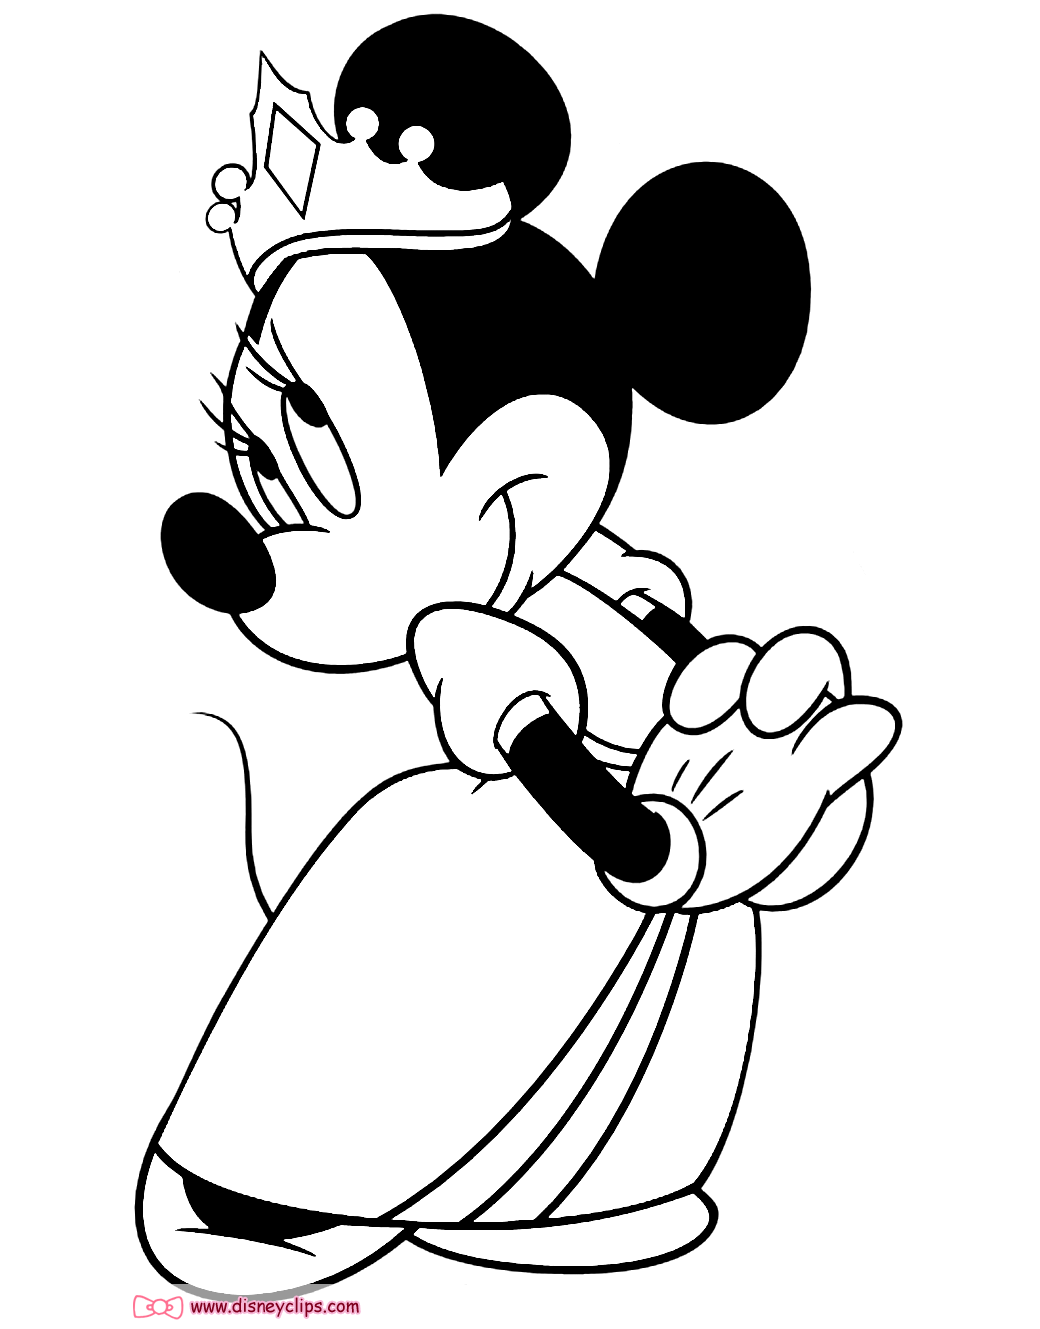 65 Free Minnie Mouse Coloring Pages To Print | Febi Art